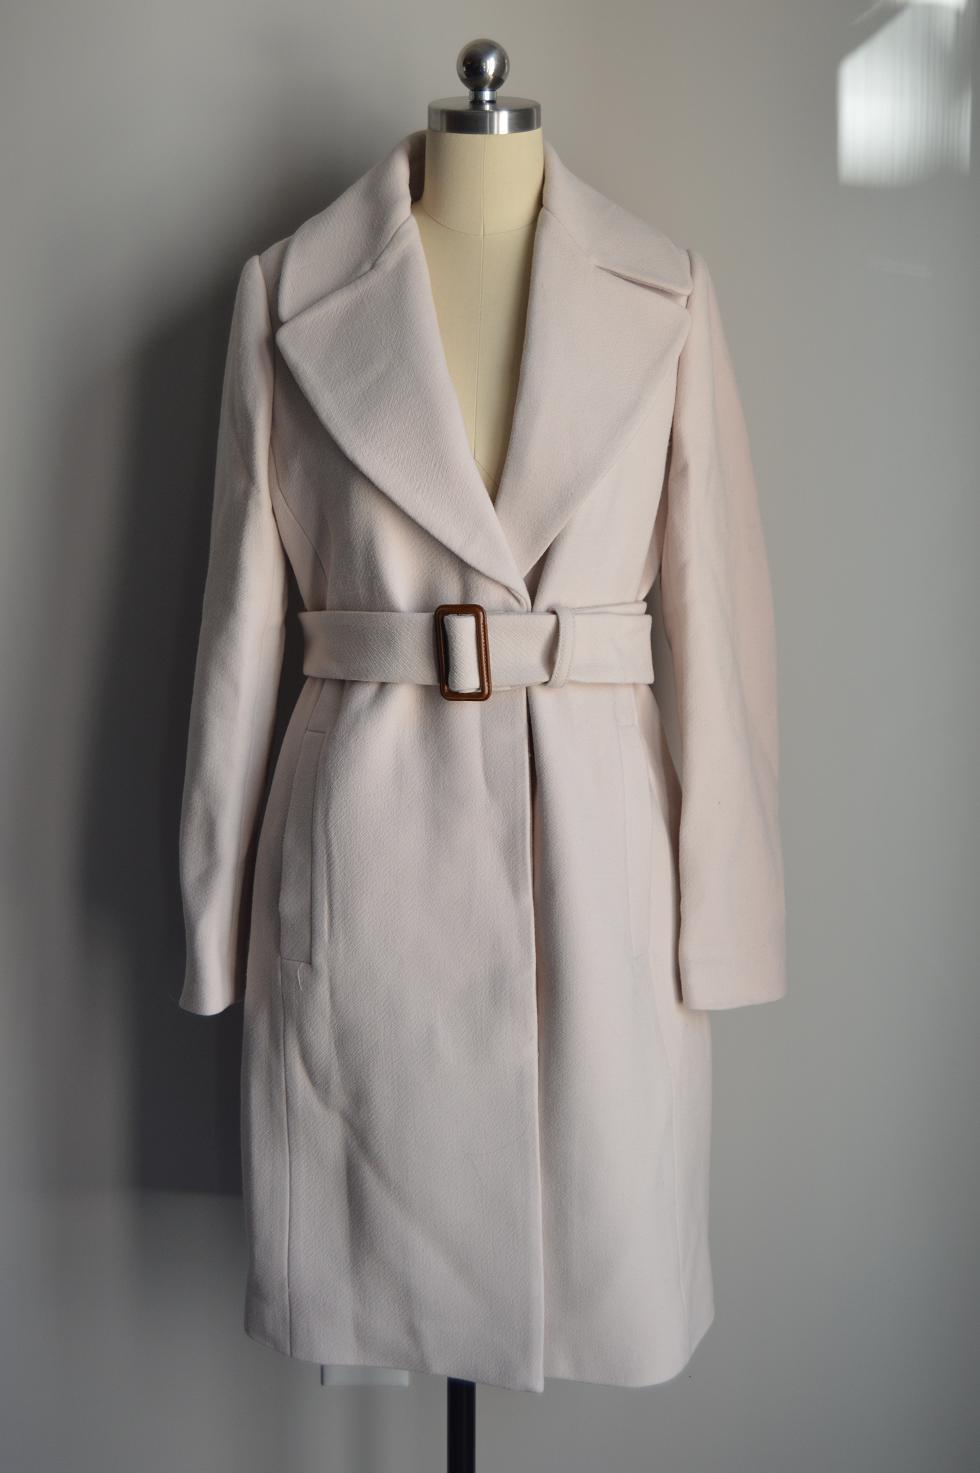 J.Crew $425 Double-Cloth Belted Trench Coat Sz 4 Vintage Champagne Ivory  E4733